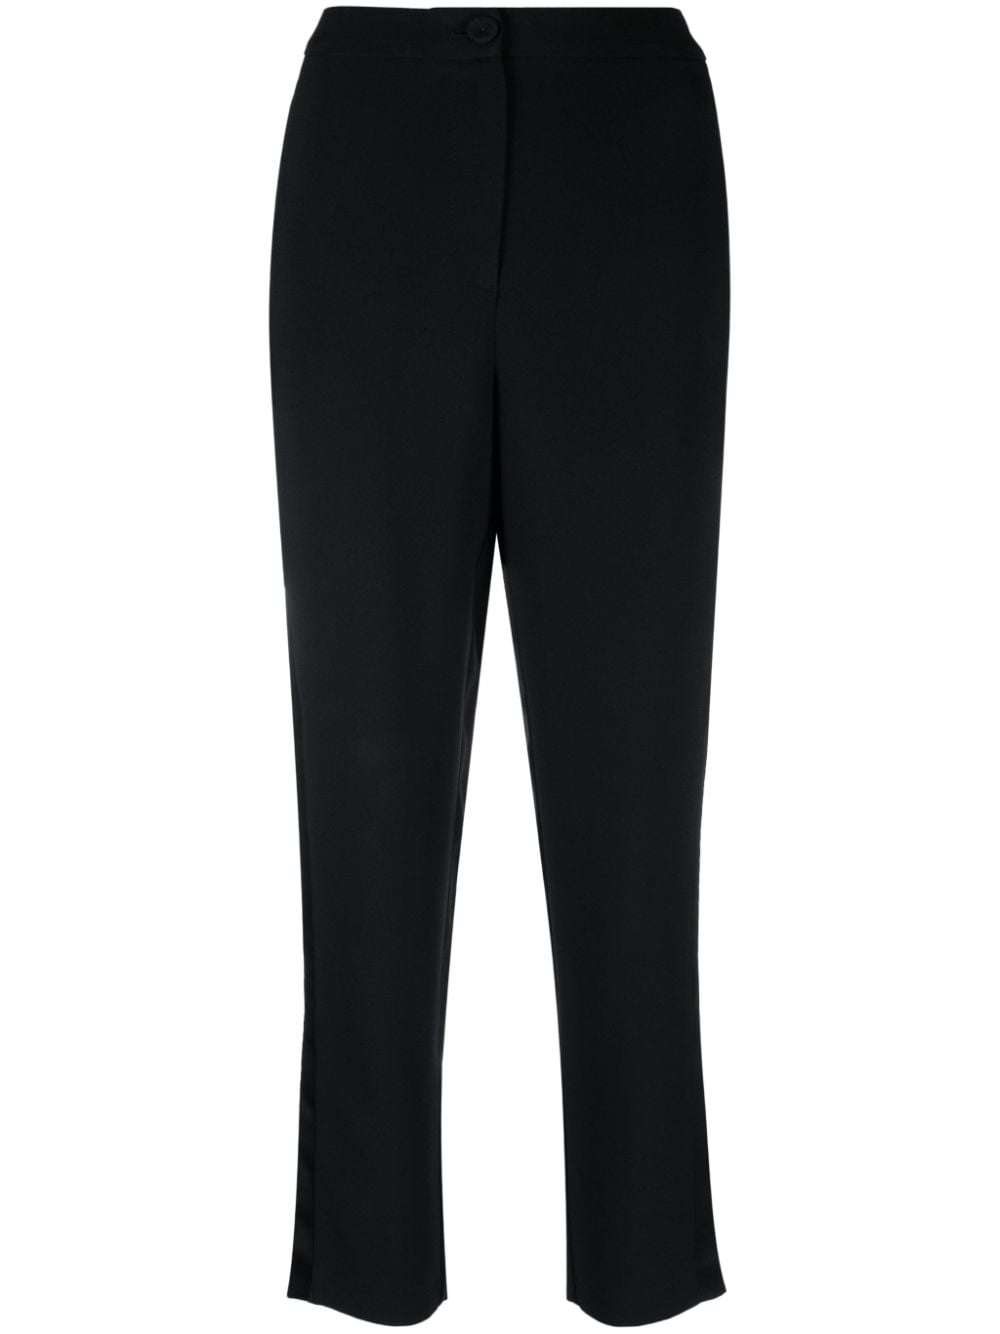 FEDERICA TOSI SATIN-TRIM TAPERED TROUSERS